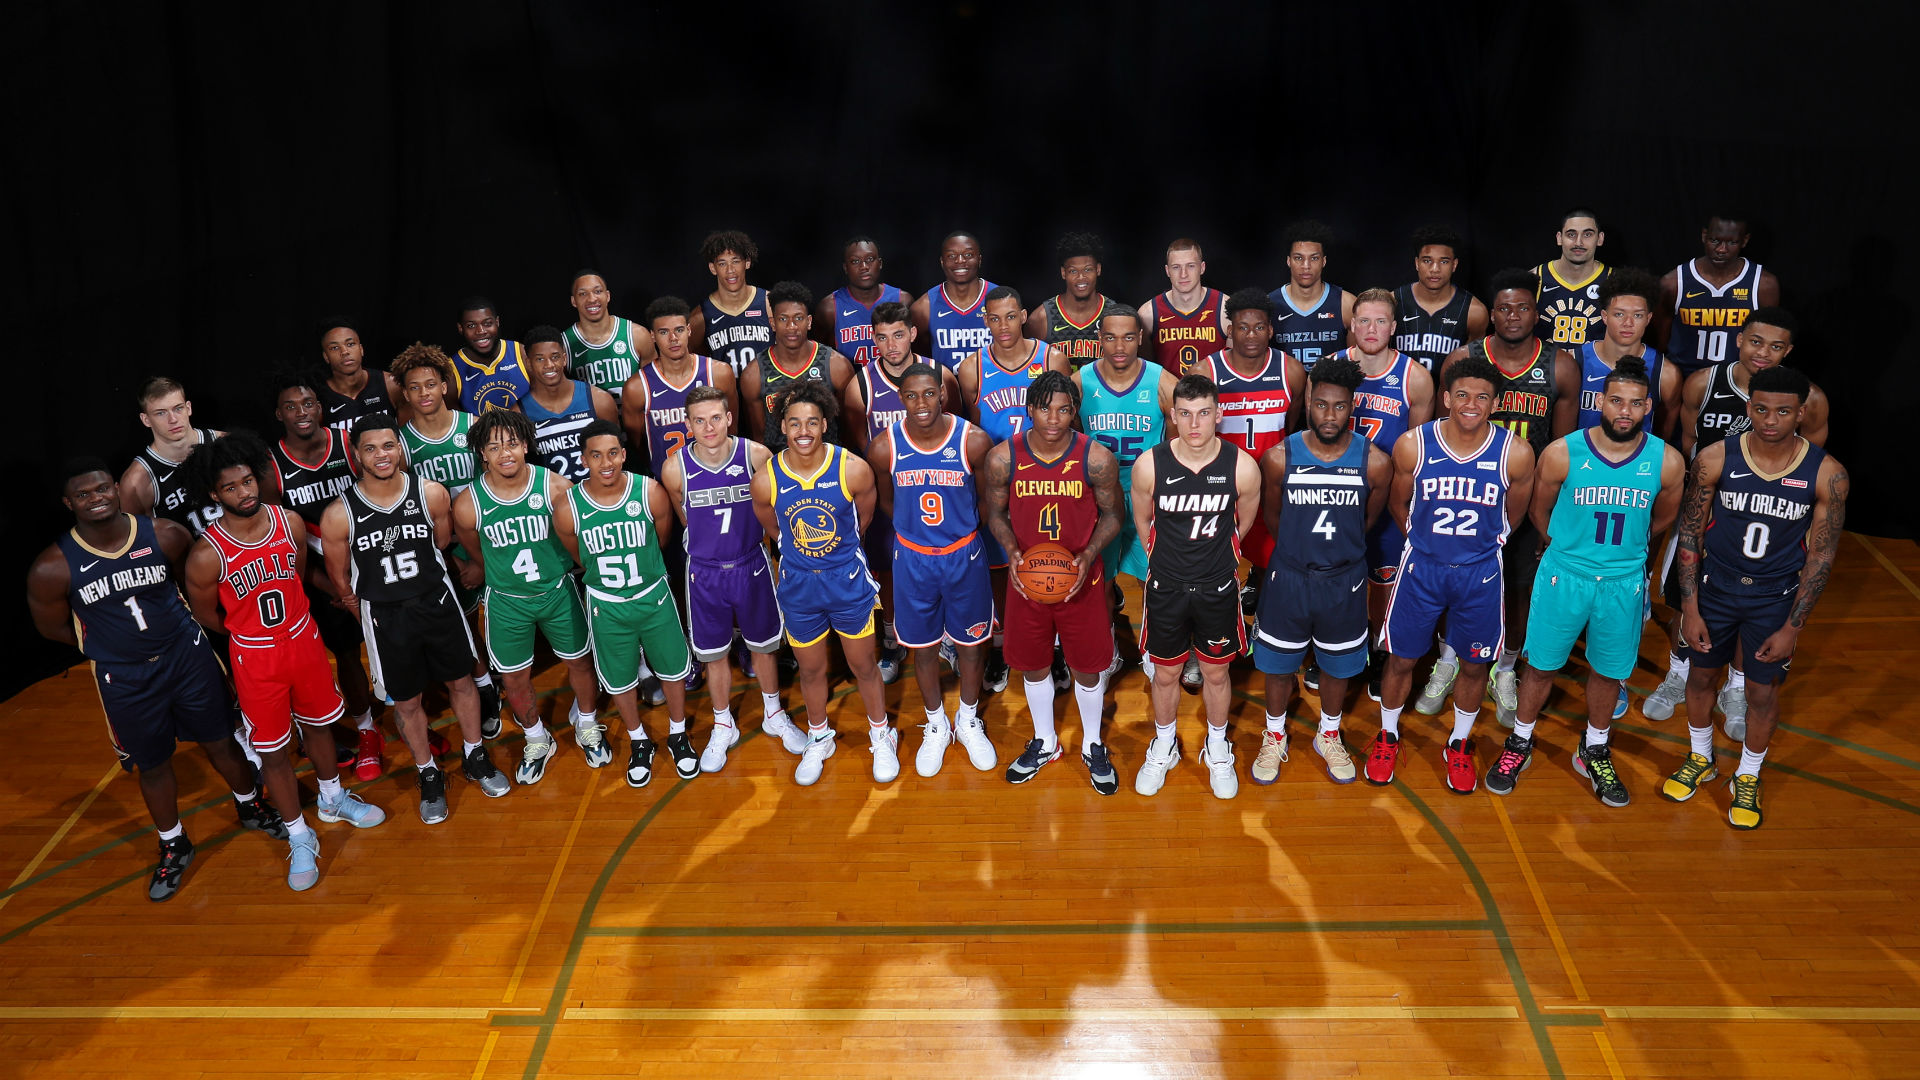 Best sights and sounds from the 2019 NBA Rookie Photo Shoot. Sporting News India